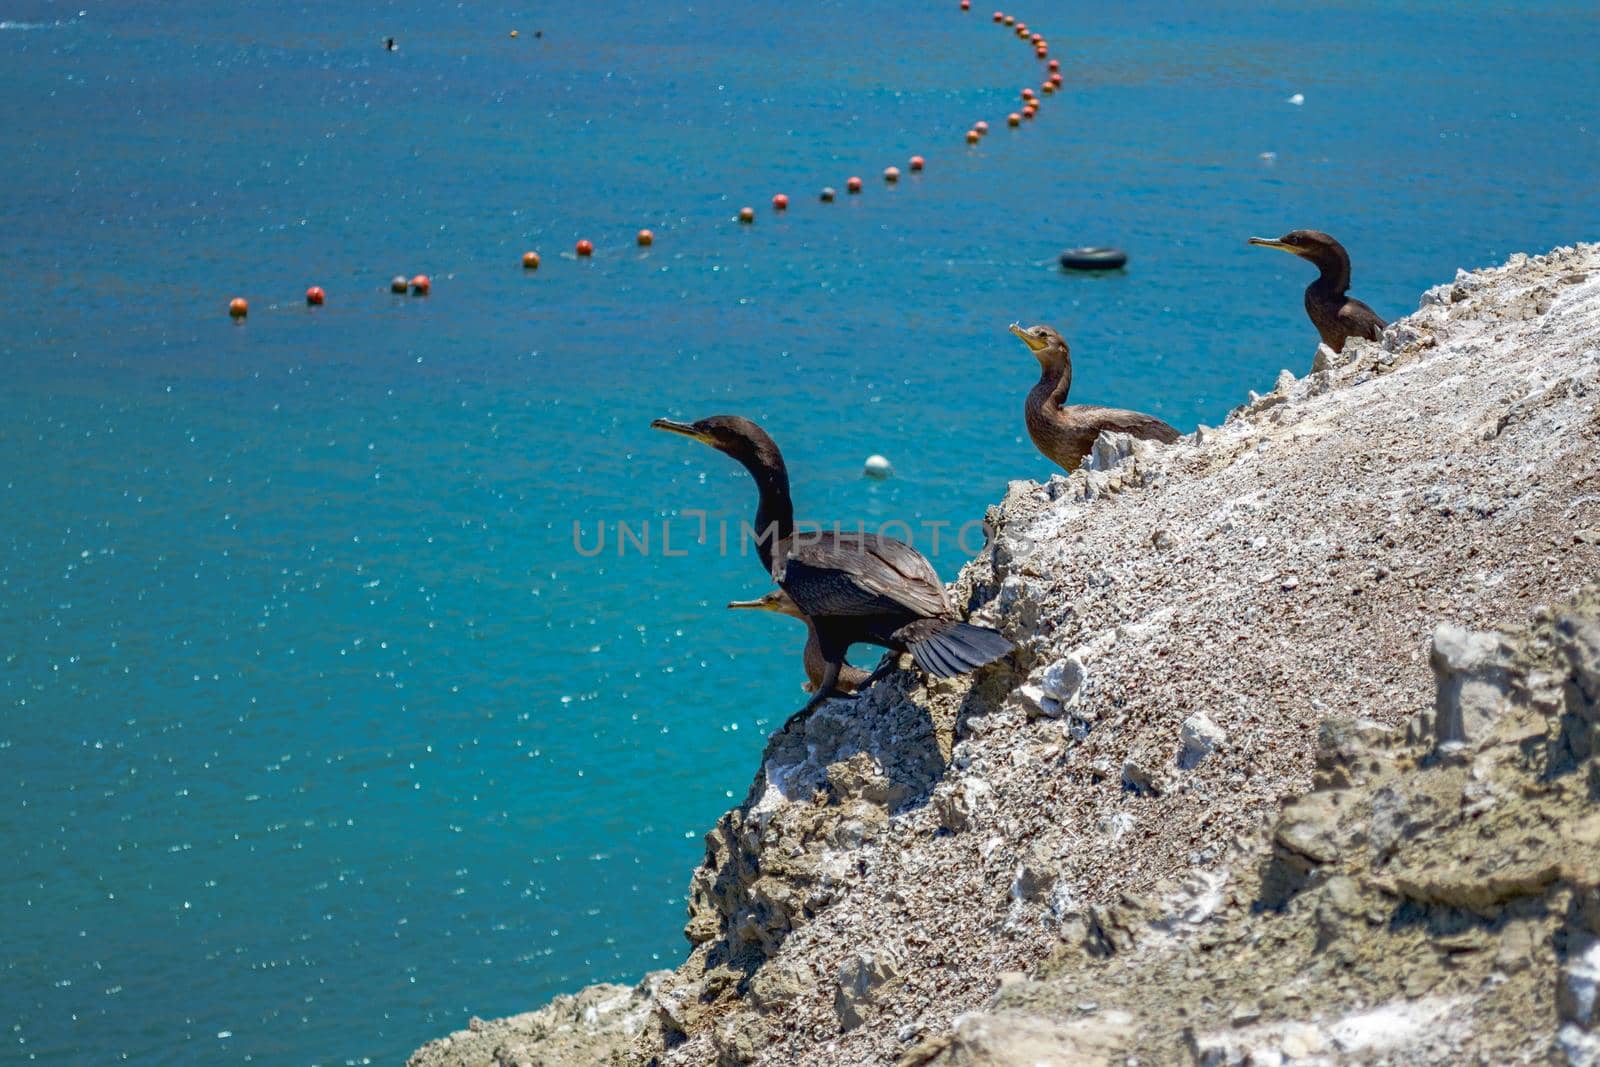 Black cormorants (Phalacrocorax carbo) perched on the rocks by the sea of Antofagasta, Chile